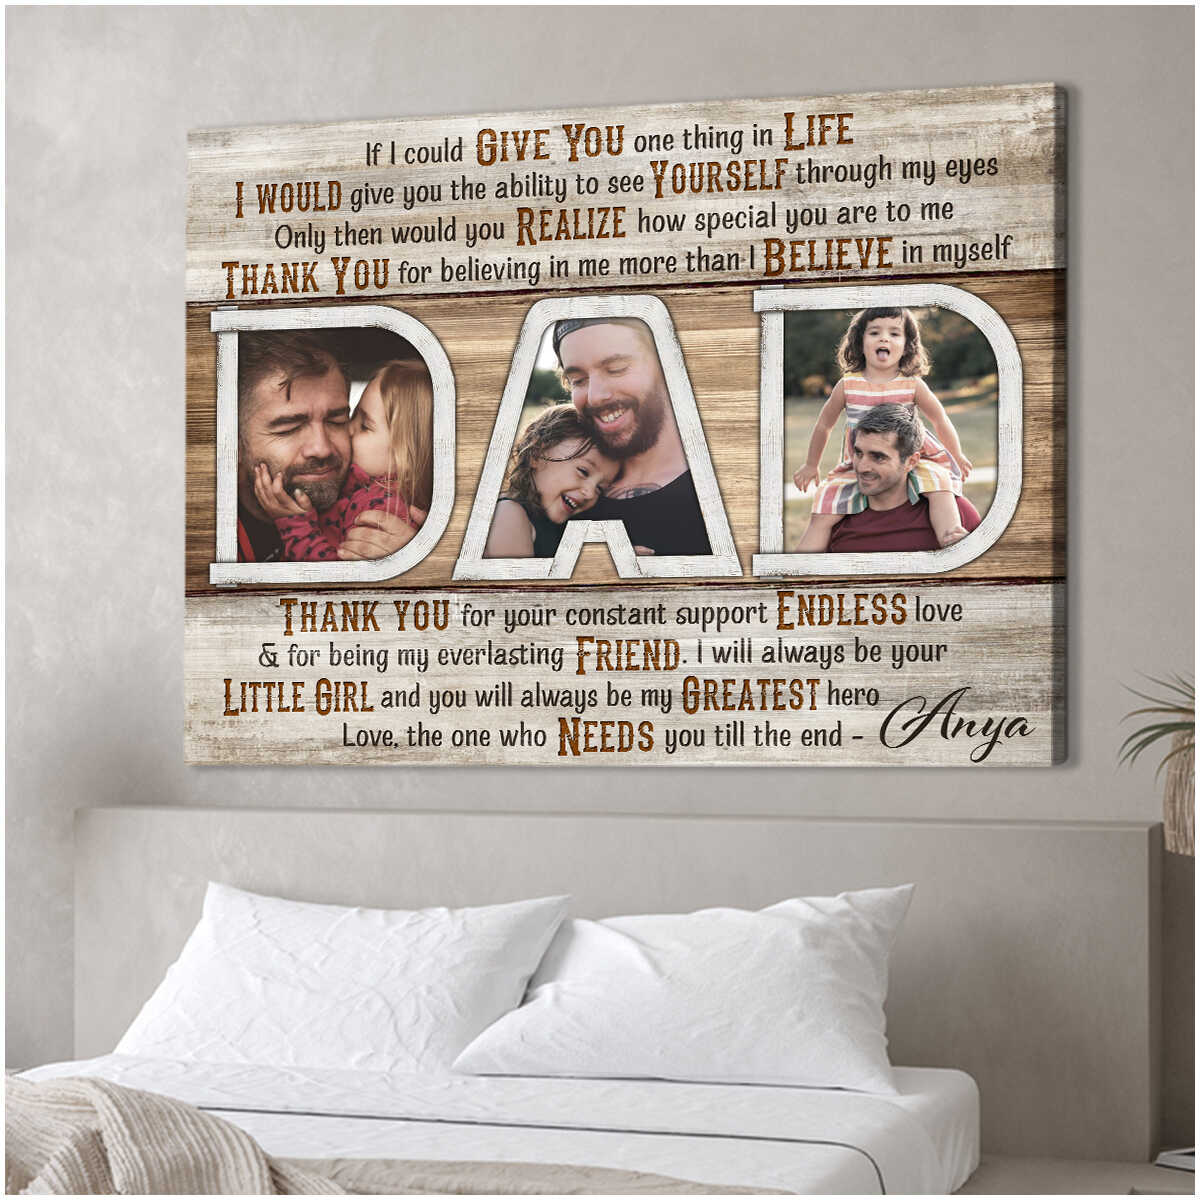 https://images.ohcanvas.com/ohcanvas_com/2022/05/25035519/sentimental-gift-for-dad-from-daughter-personalized-fathers-day-gift-2.jpg